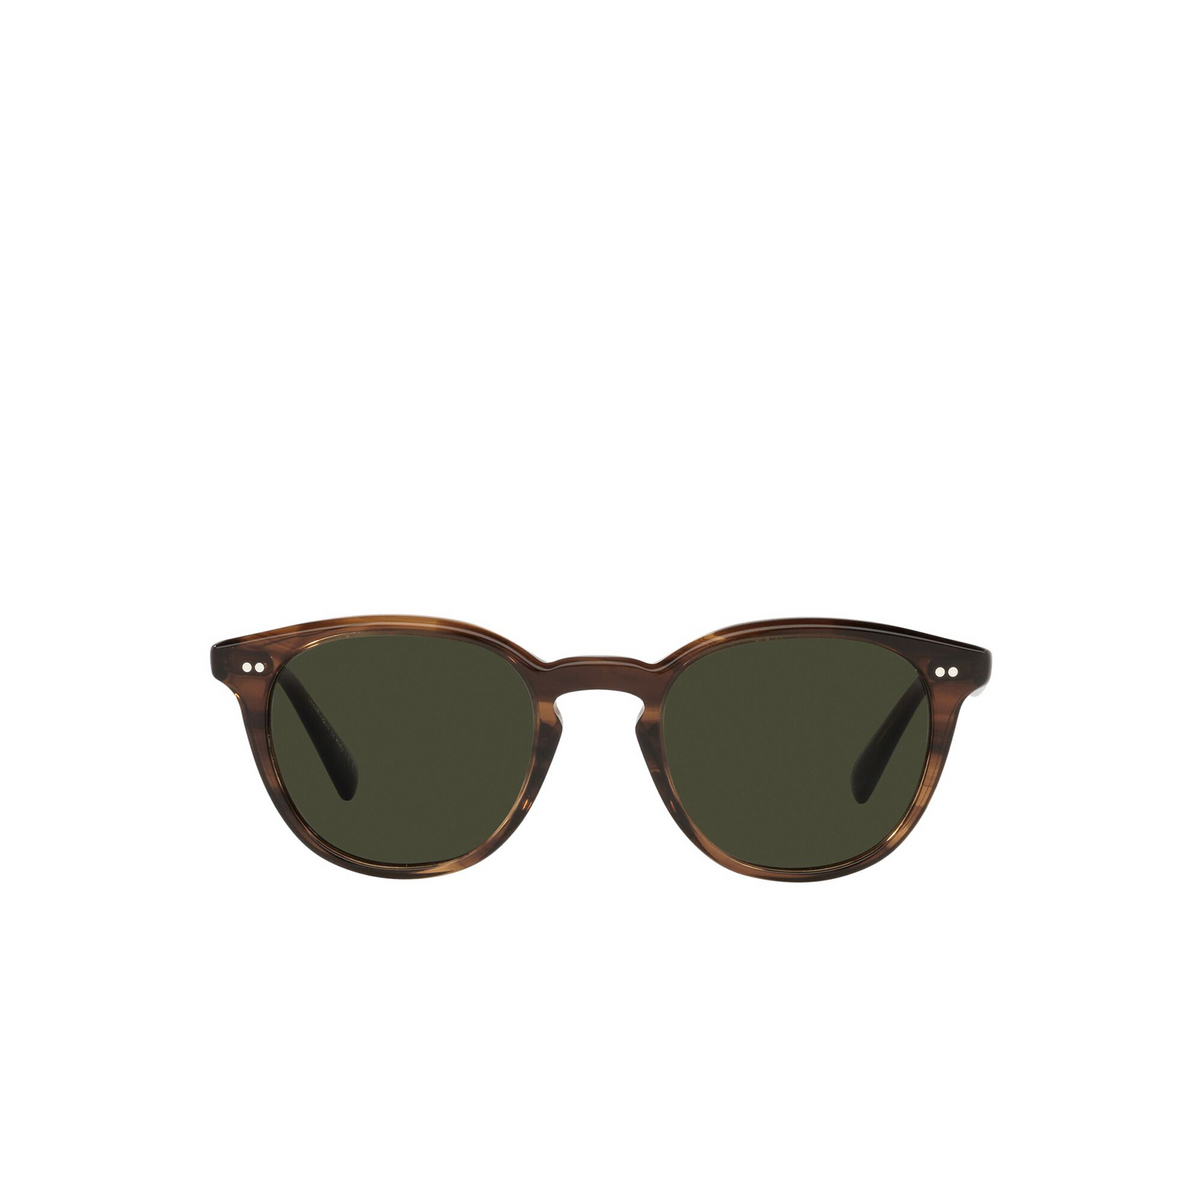 Oliver Peoples DESMON Sunglasses 1724P1 Tuscany Tortoise - front view